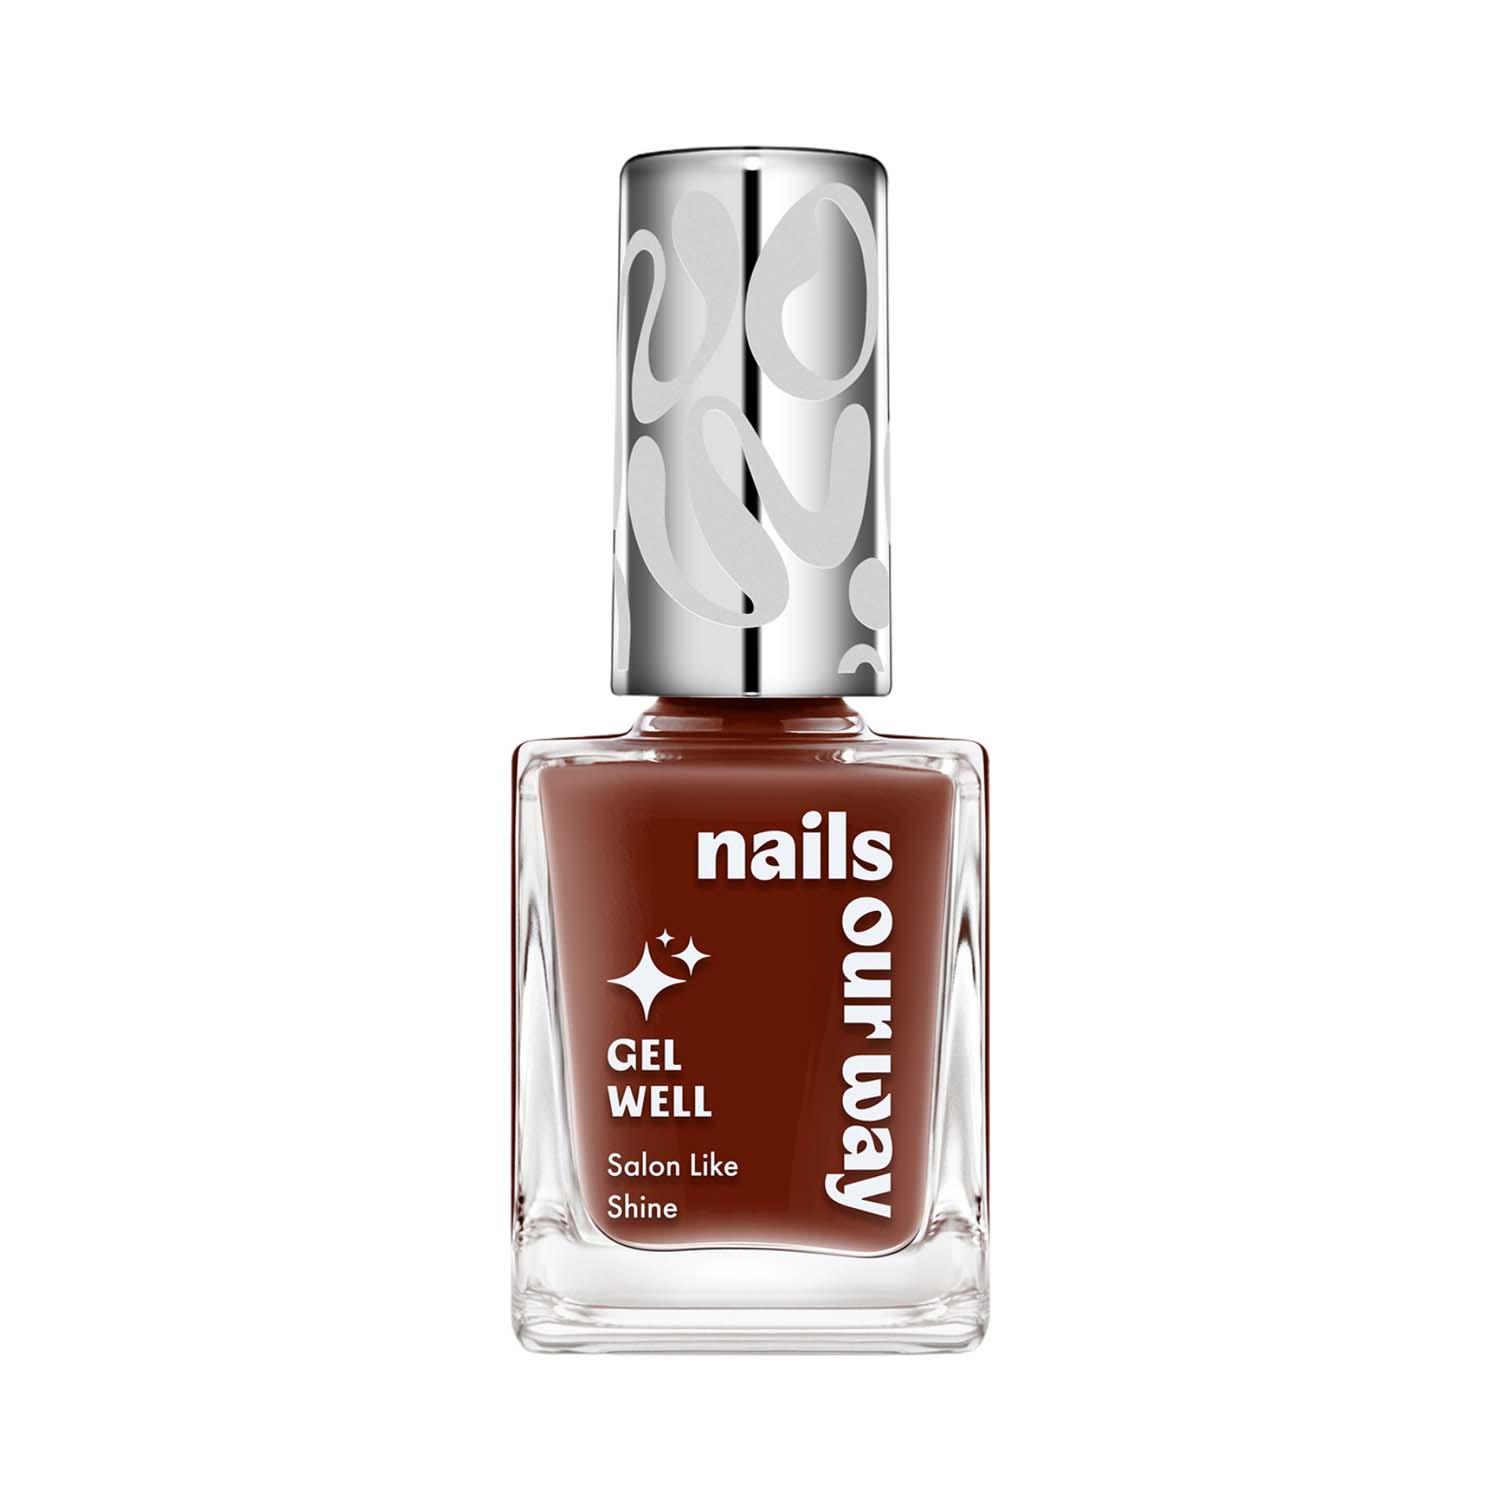 Nails Our Way | Nails Our Way Gel Well Nail Enamel - 505 Bold (10 ml)